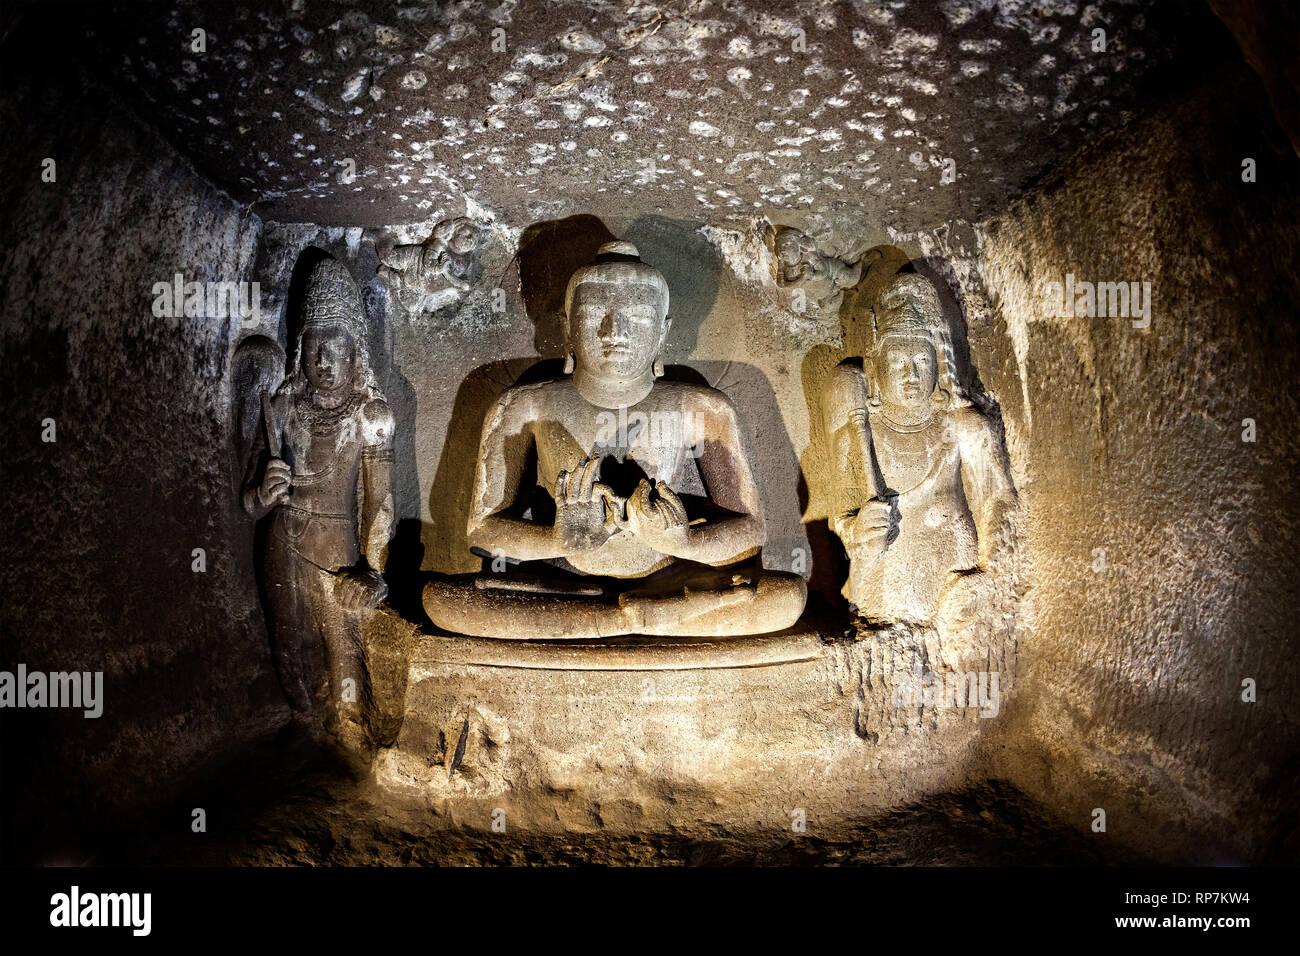 Carved statues of ancient laying Buddha in big hall with columns in Ellora cave near Aurangabad, Maharashtra, India Stock Photo